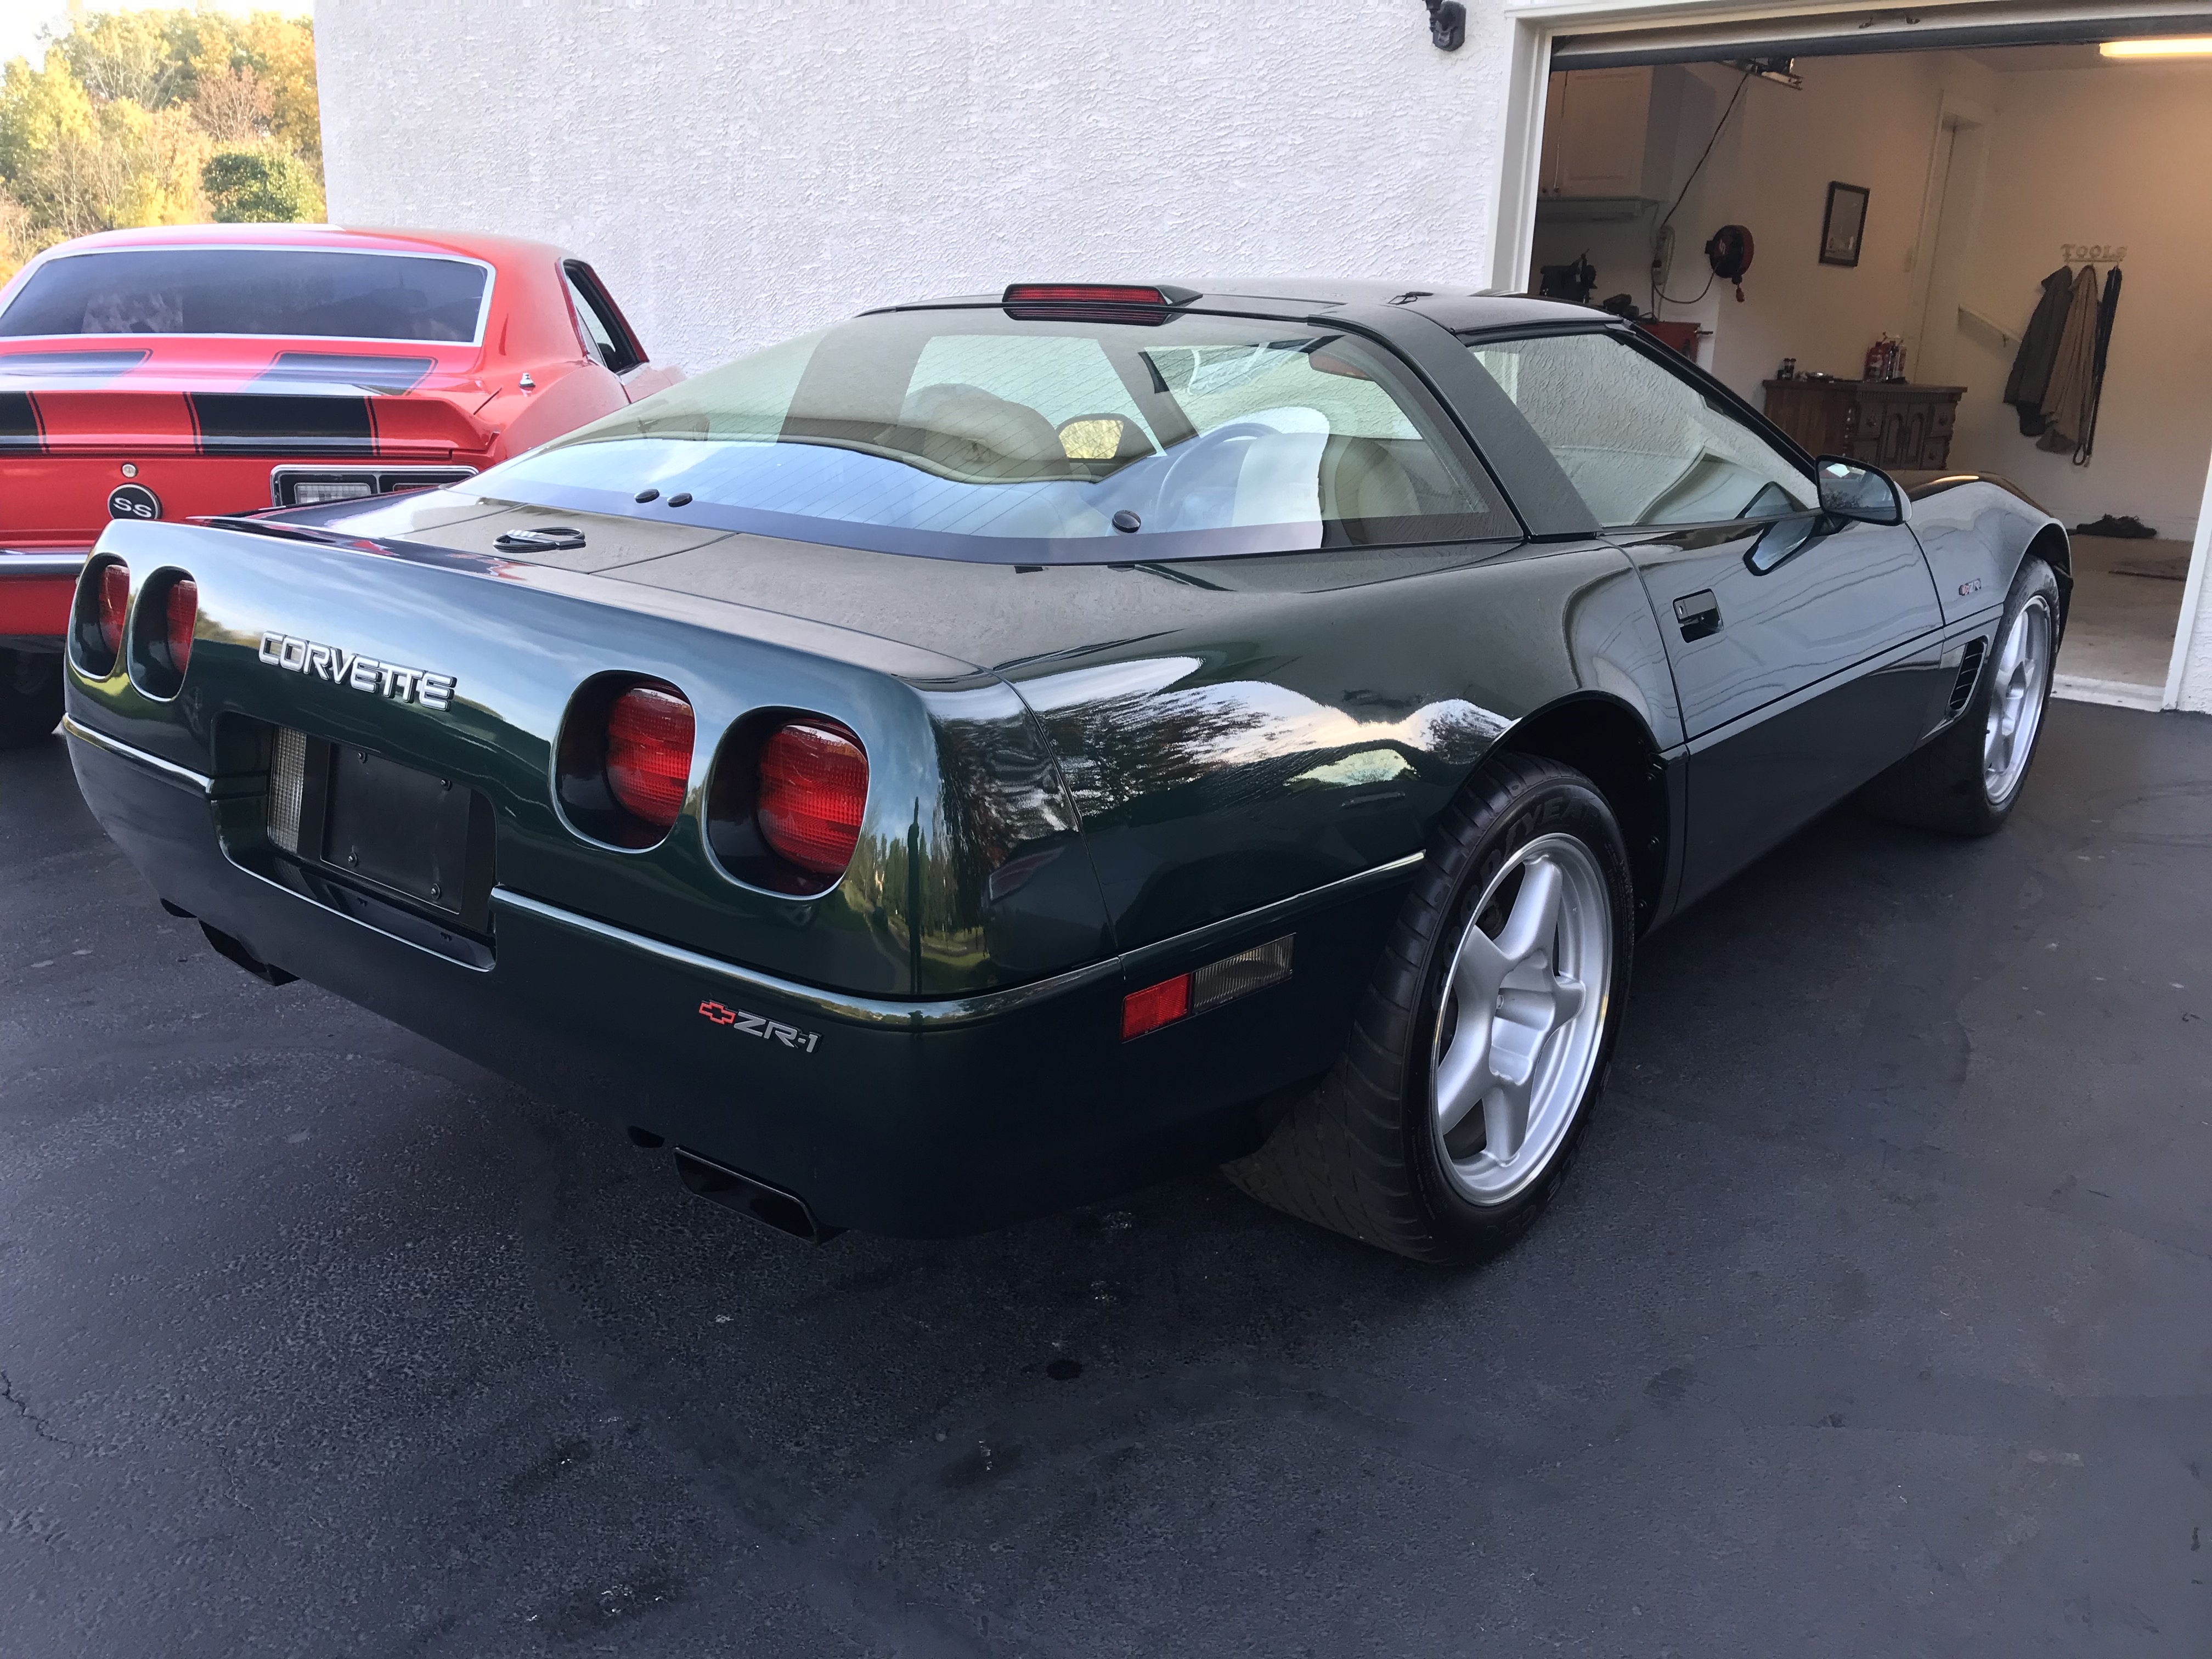 New Owner To A 1995 Zr1 Admiral Blue Light Gray Interior